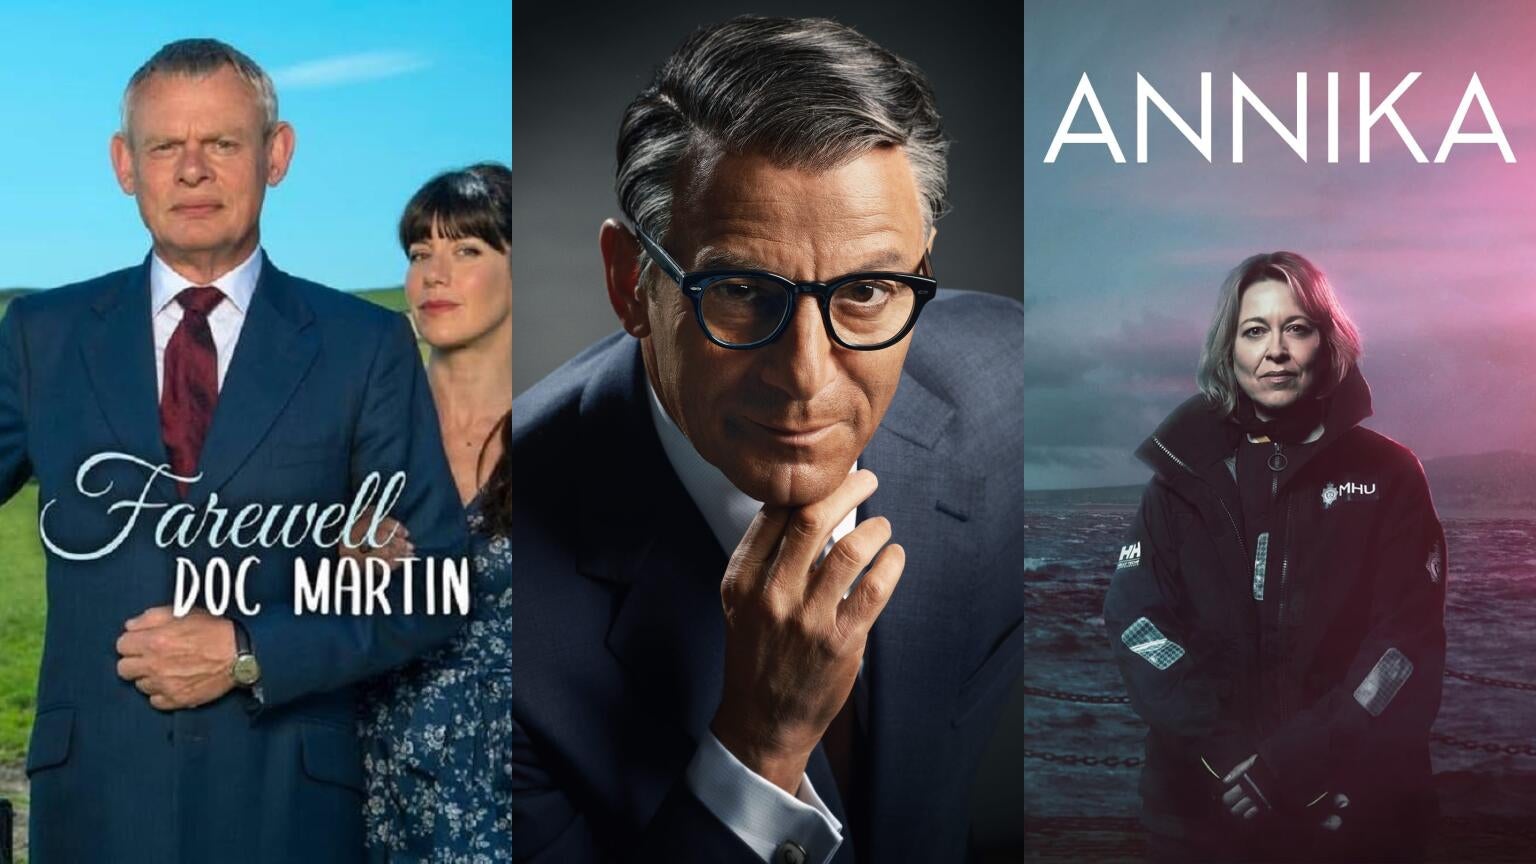 Posters for "Farewell Doc Martin," "Archie," and "Annika"